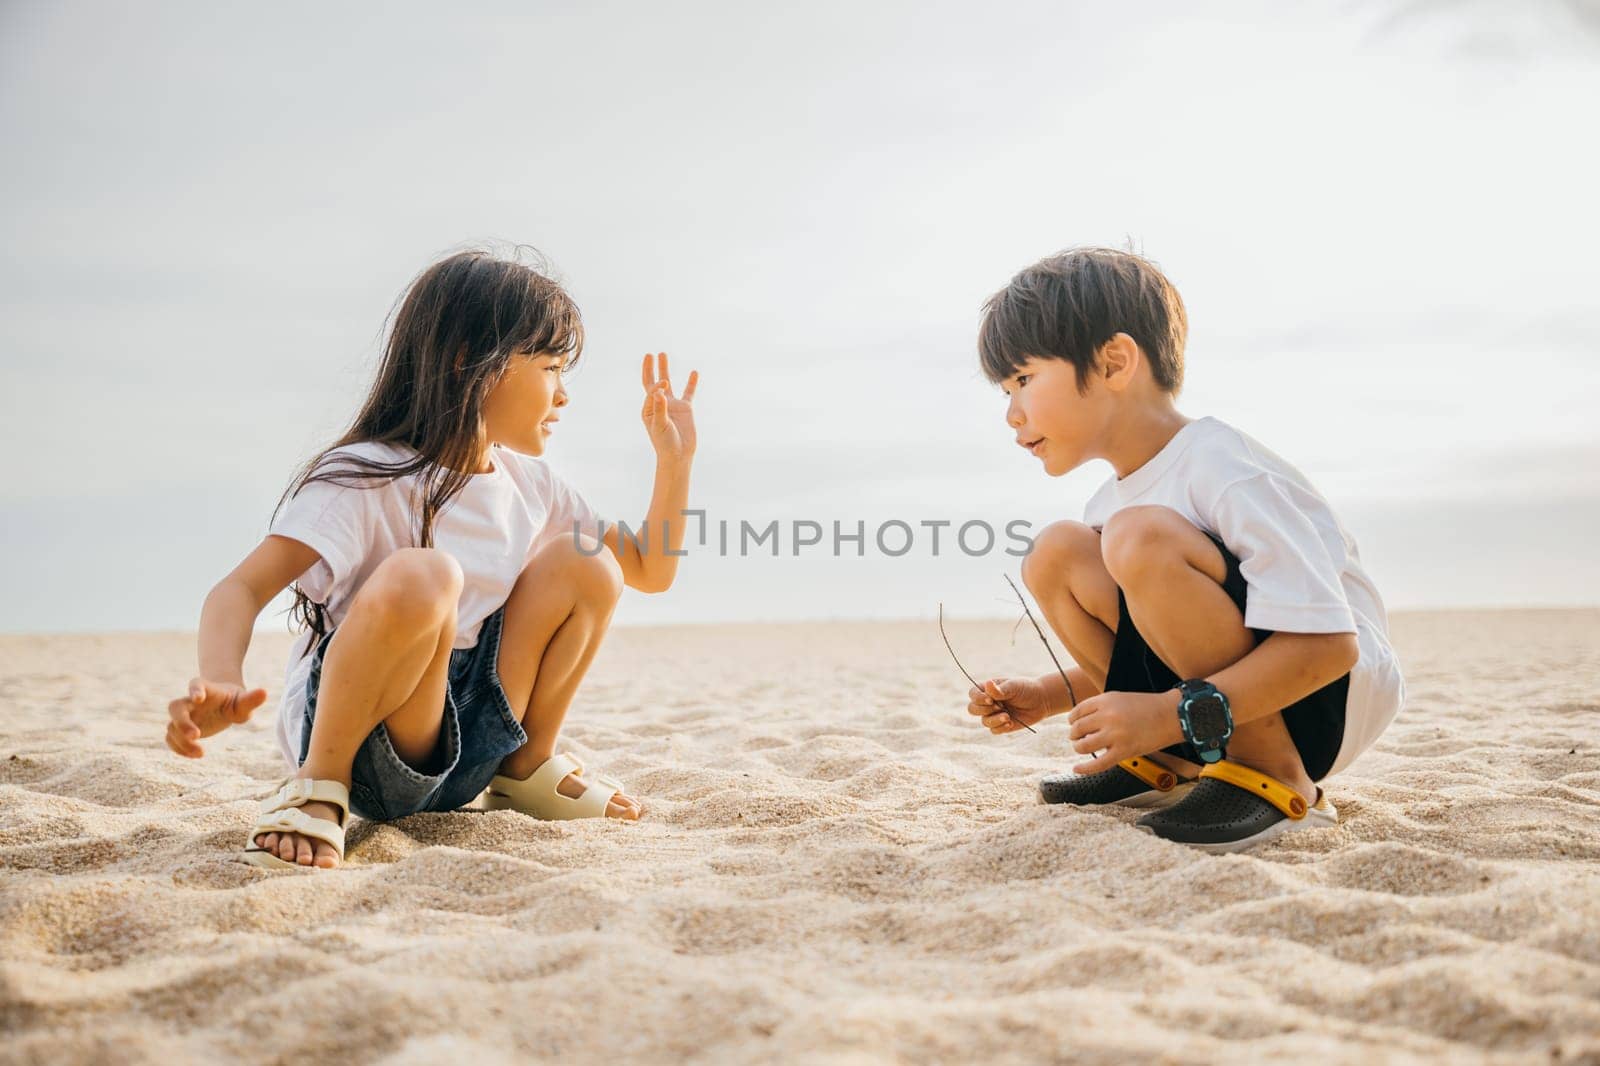 A sunny beach day filled with family joy as children boy and girl play and build sandcastles. Sibling laughter happiness and carefree enjoyment captured in this delightful vacation moment.